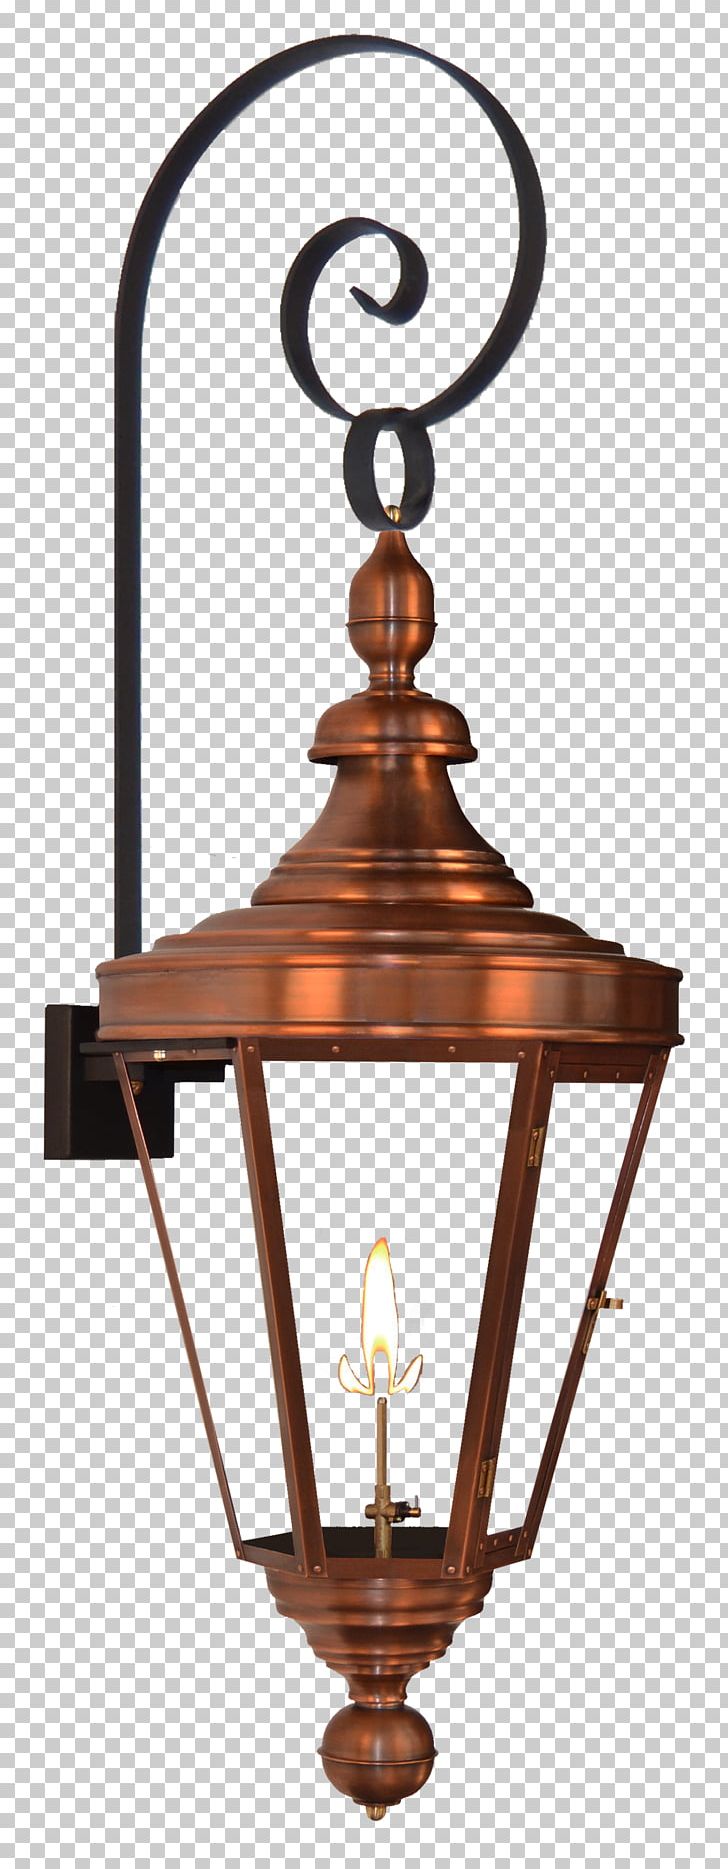 Light Fixture Gas Lighting Lantern PNG, Clipart, Ceiling Fixture, Chinese Lantern, Coppersmith, Electricity, Gas Burner Free PNG Download